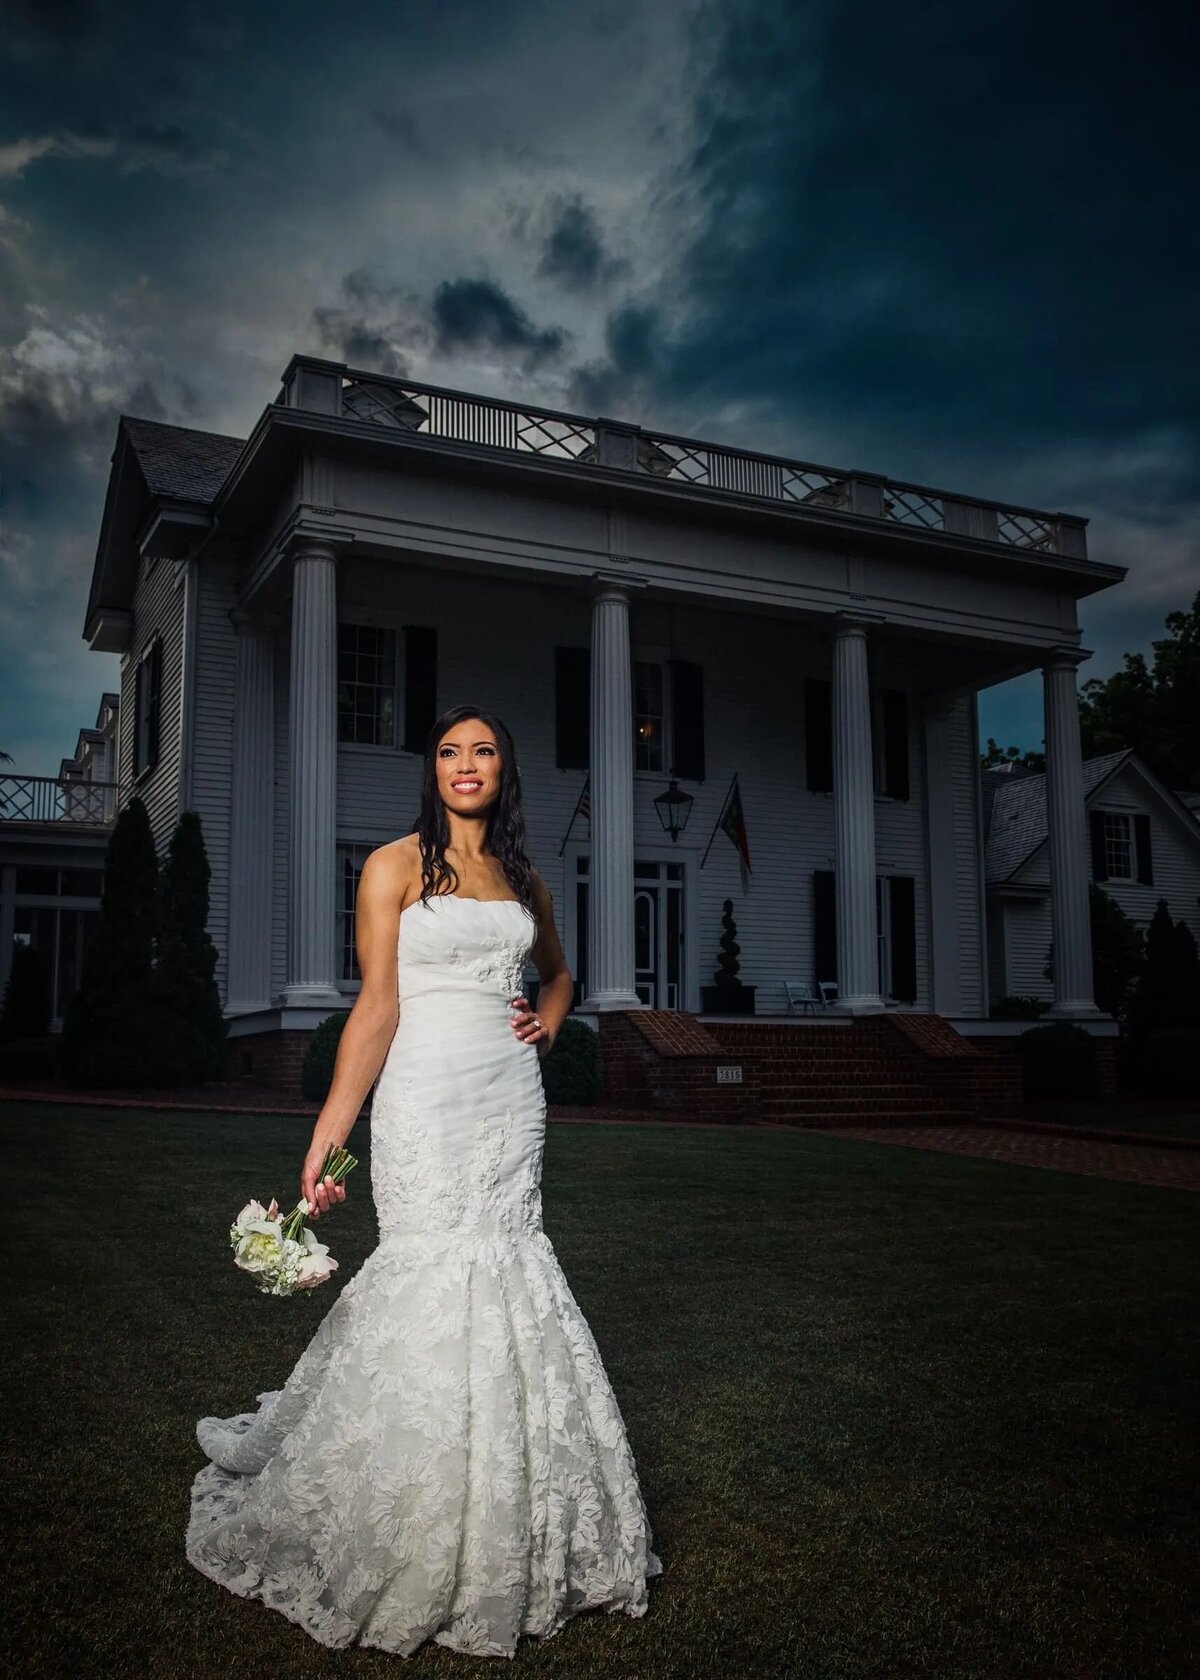 A bride standing in front of a large house with one hand on her hip.